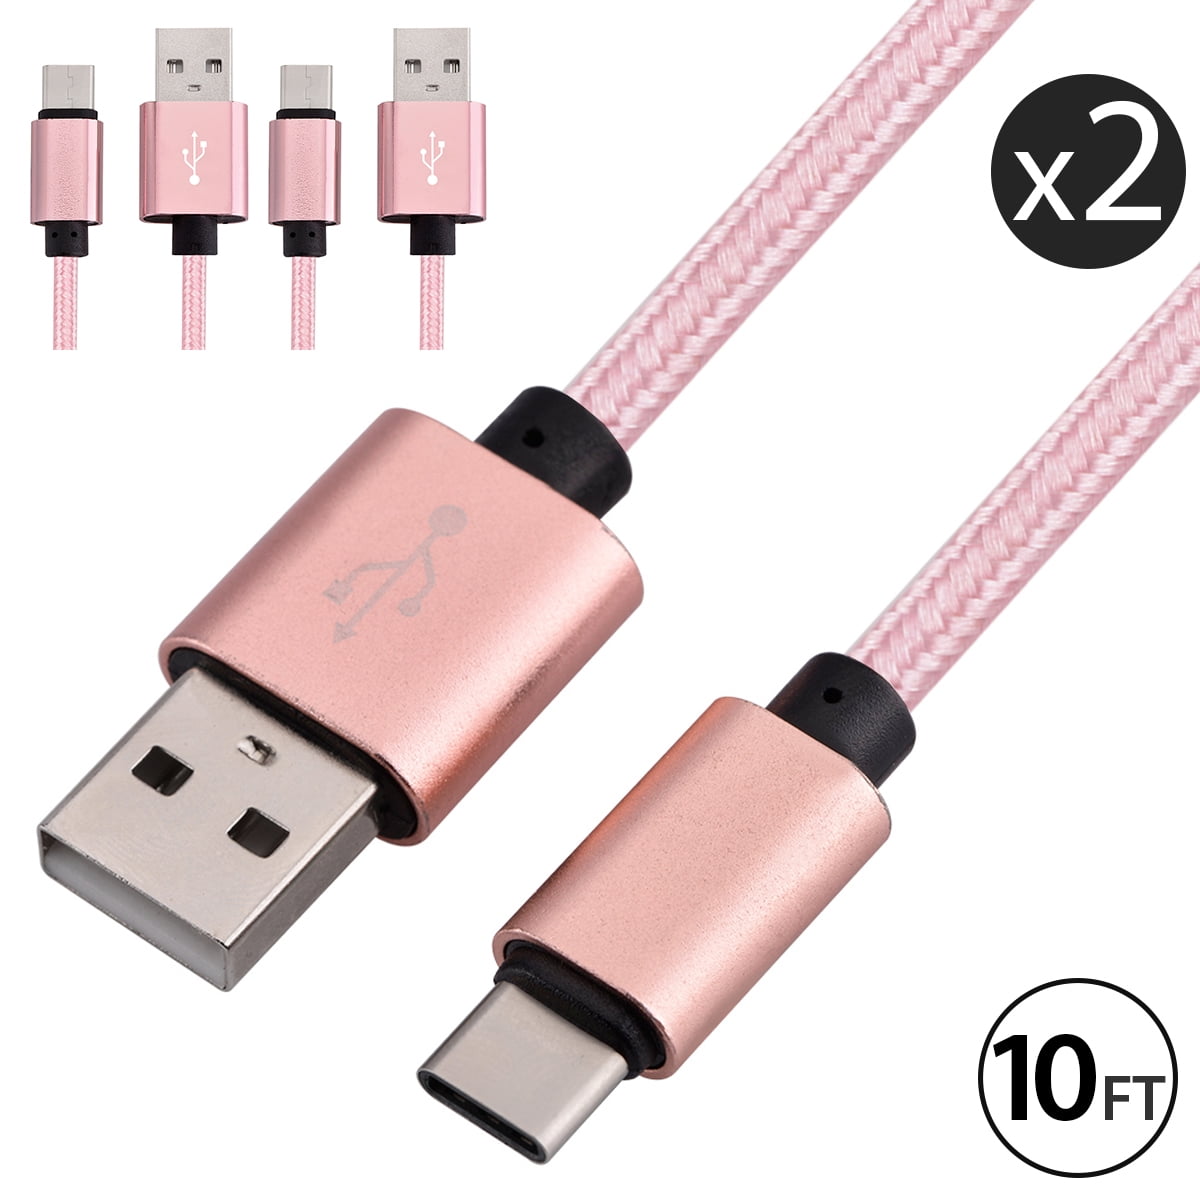 1M - Fast Charge at 480Mbps 3 Feet S8+ S9 Google Pixel and Others HP USB C to USB C v3.1 Cable Great for USB-C Devices Galaxy S8 